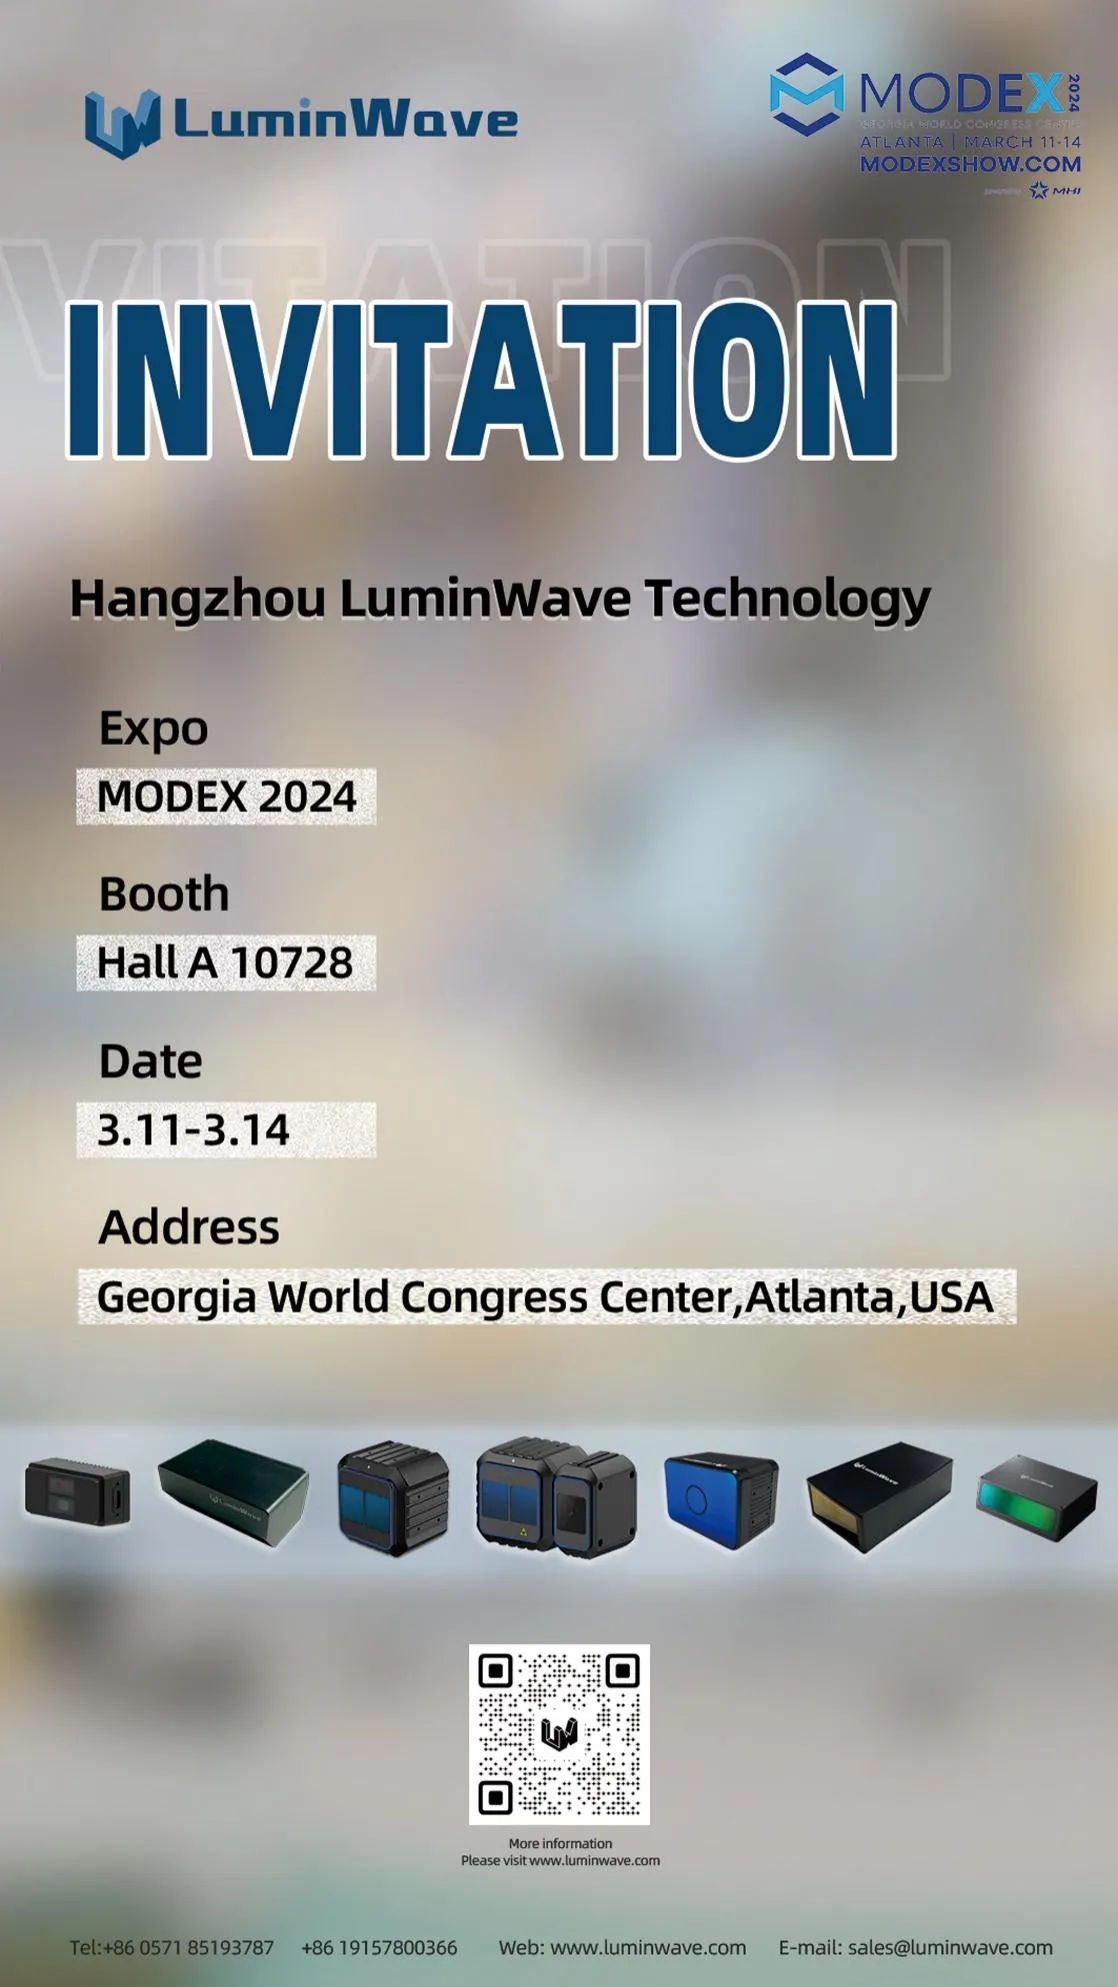 Luminwave Will Make Appearance for MODEX 2024